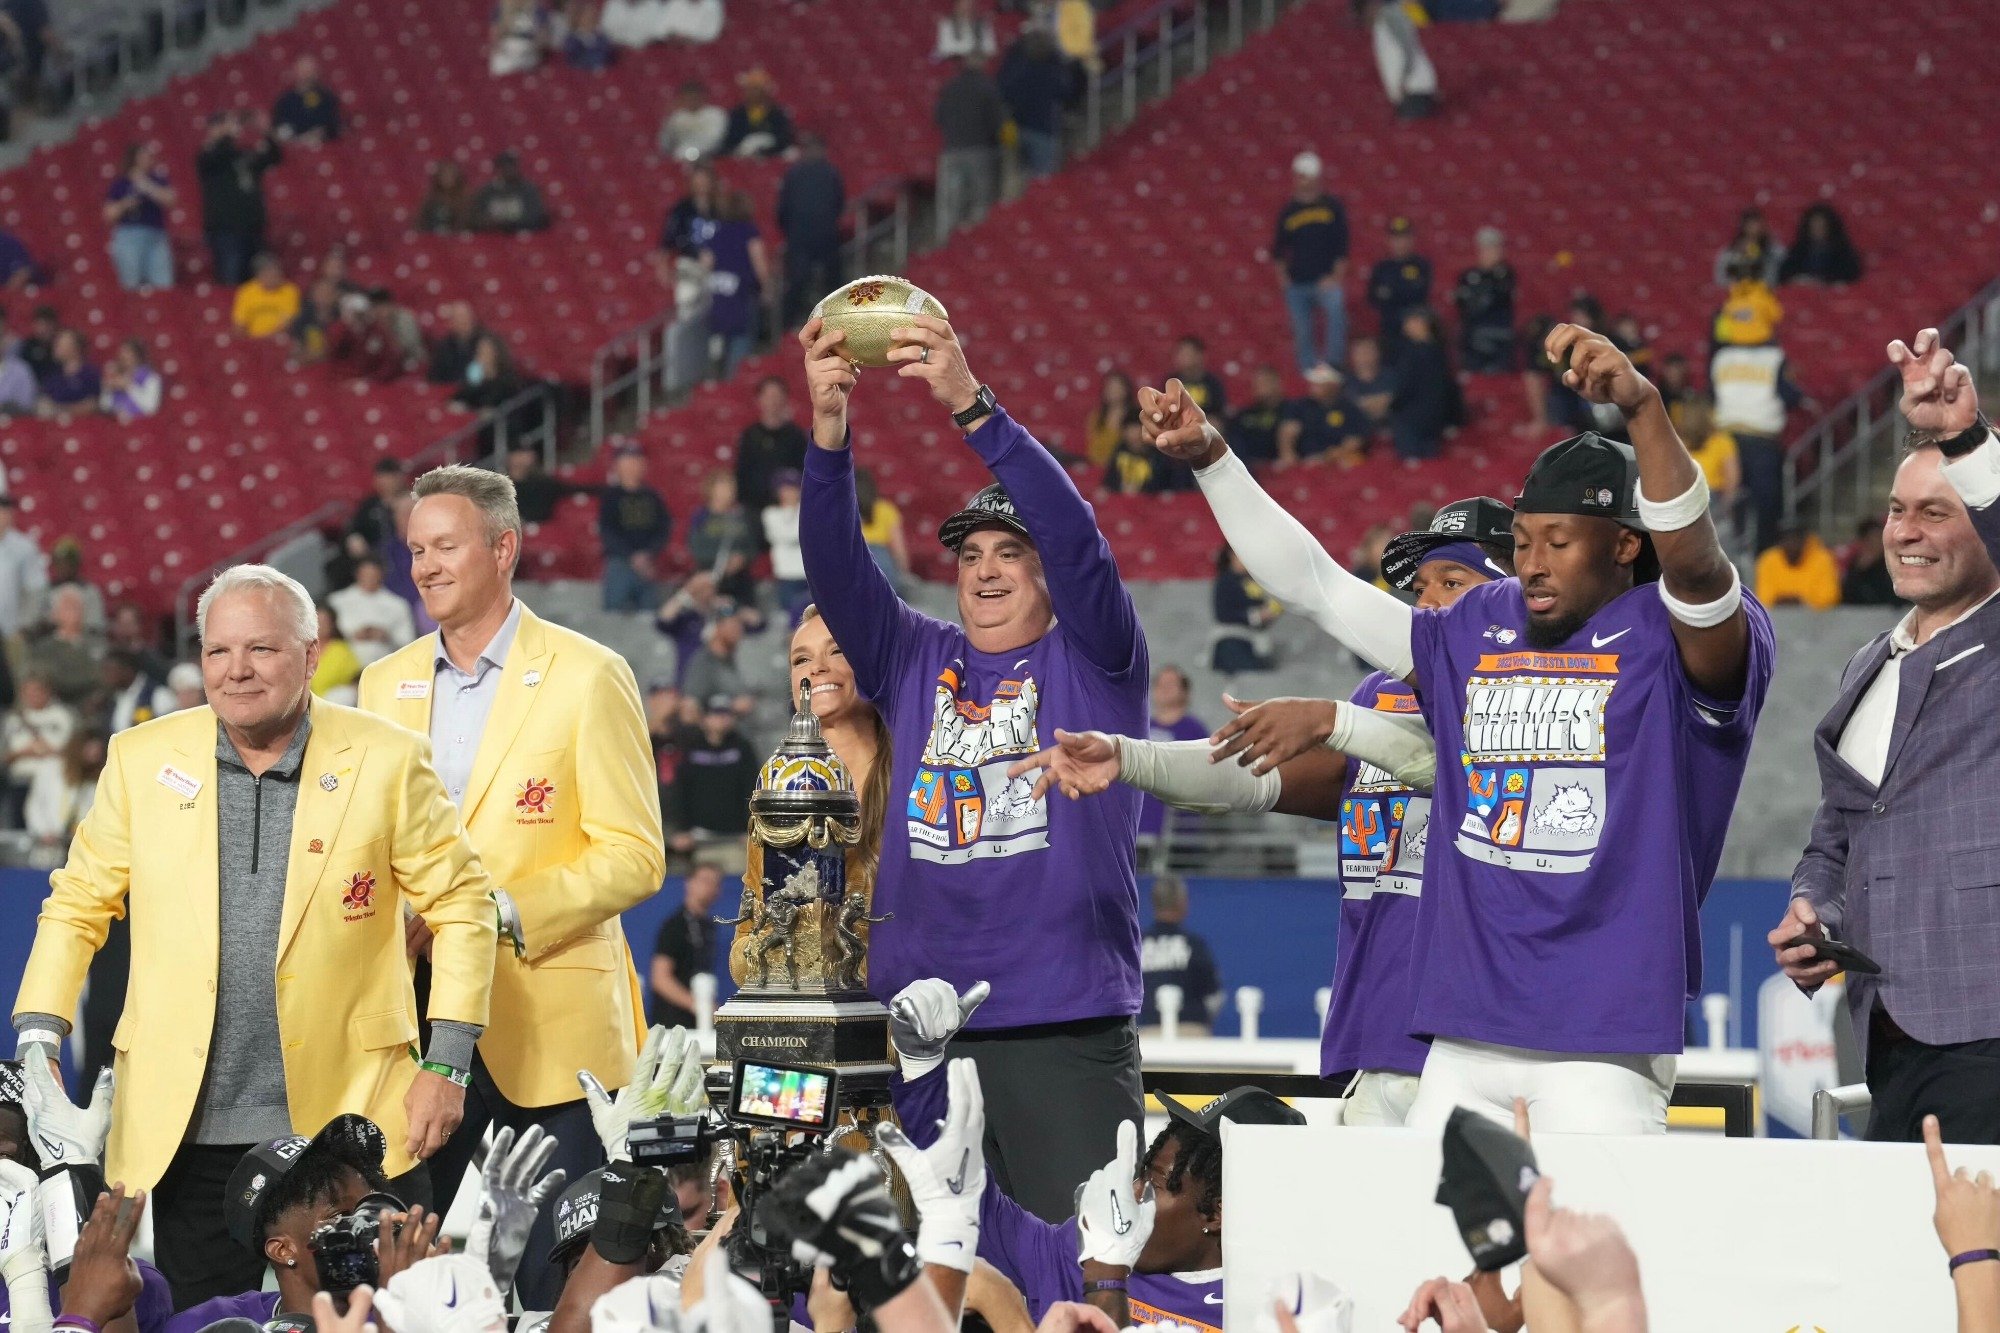 TCU, Once a 200-1 Longshot, Now a Win Away from College Football Title